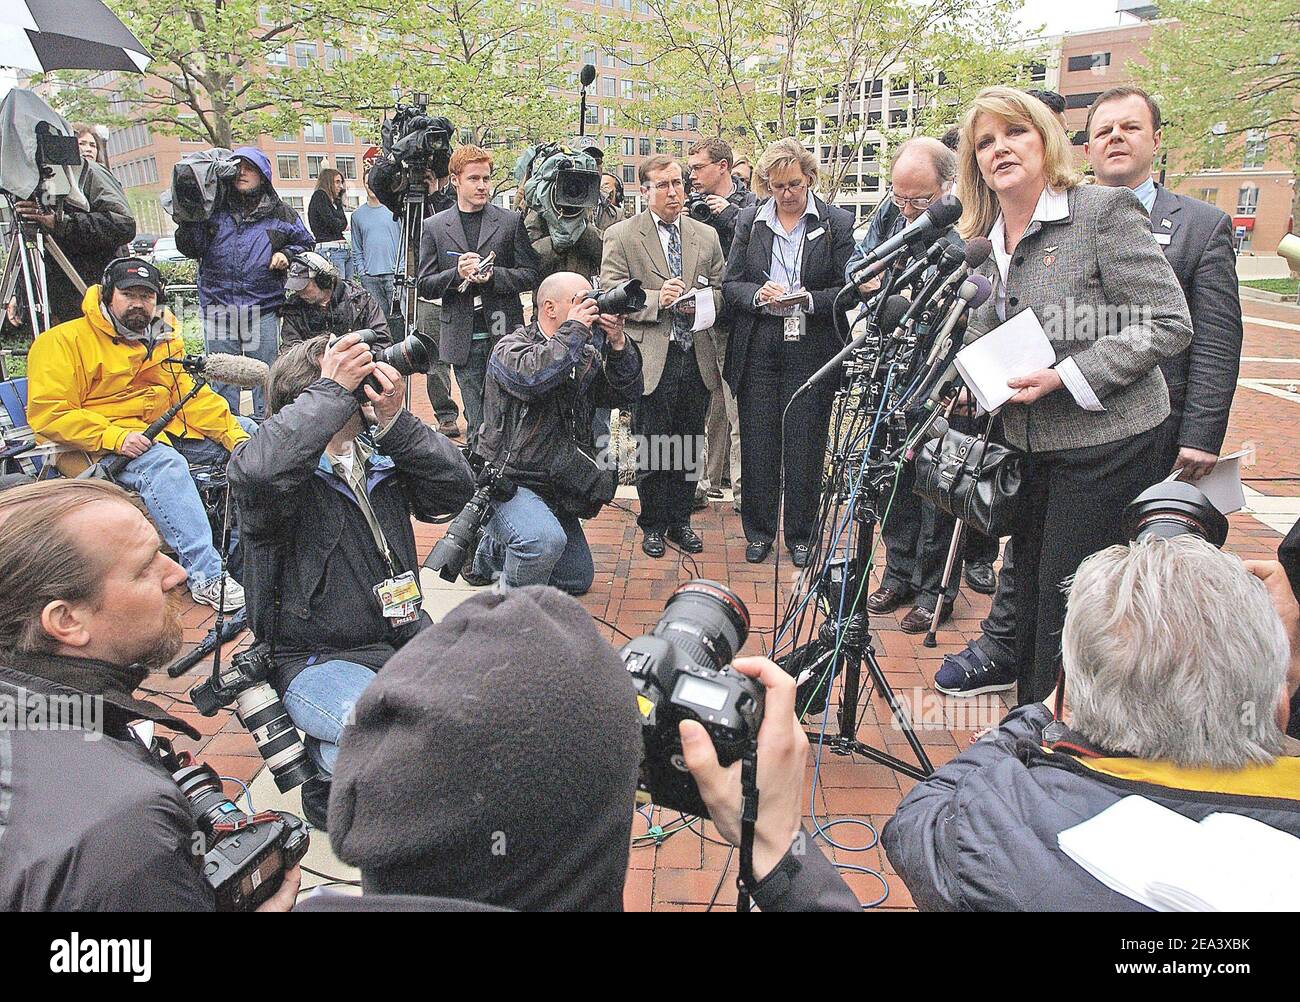 Debra Burlingane wife of Charles , pilot of flight 77 , who died on September attacks speaks to the press after the verdict of conspirator Zacarias Moussaoui who appears in court and pleads guilty to charges related to the 9/11 attacks in Alexandria, Virginia on April 22 2005. Moussaoui, a 36 year-old French citizen of Moroccan descent, has been charged with six counts of conspiracy in relation to the Sept. 11, 2001 hijackings that killed nearly 3,000 people. He is charged with conspiring with al Qaeda in the attacks. Four of the conspiracy counts against Moussaoui, carry the death penalty. Ph Stock Photo